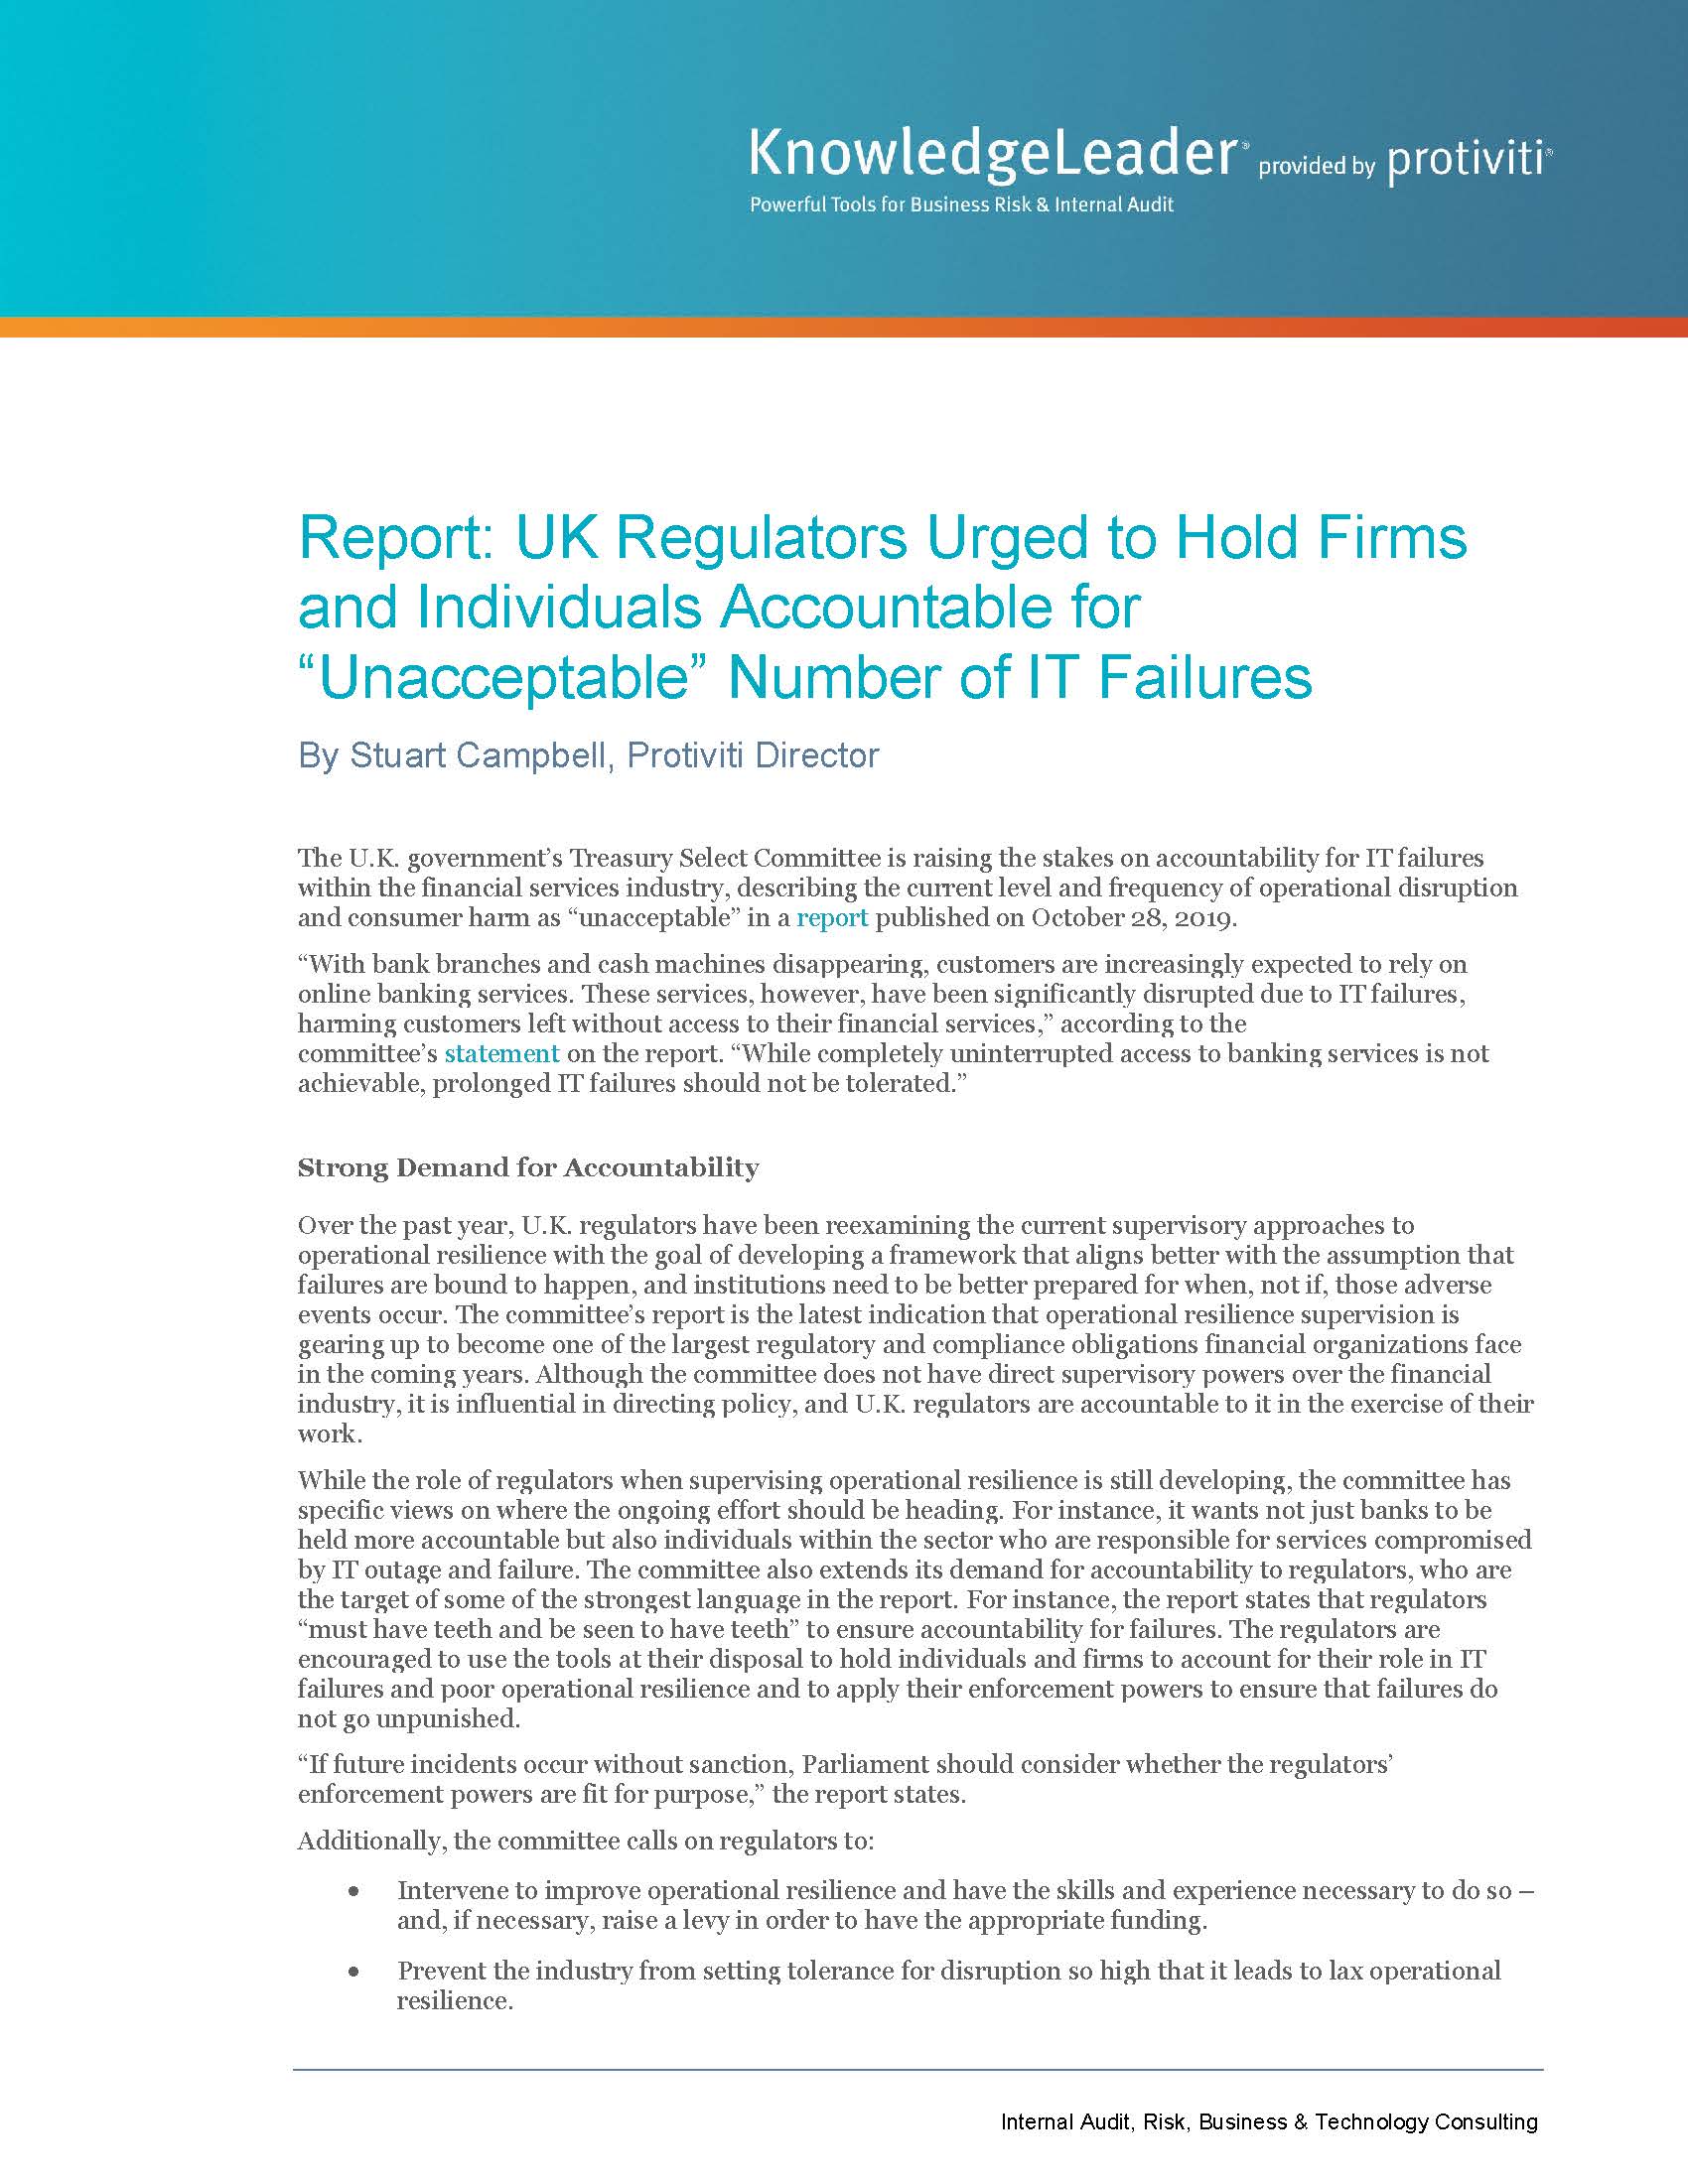 Screenshot of the first page of Report UK Regulators Urged to Hold Firms and Individuals Accountable for “Unacceptable” Number of IT Failures